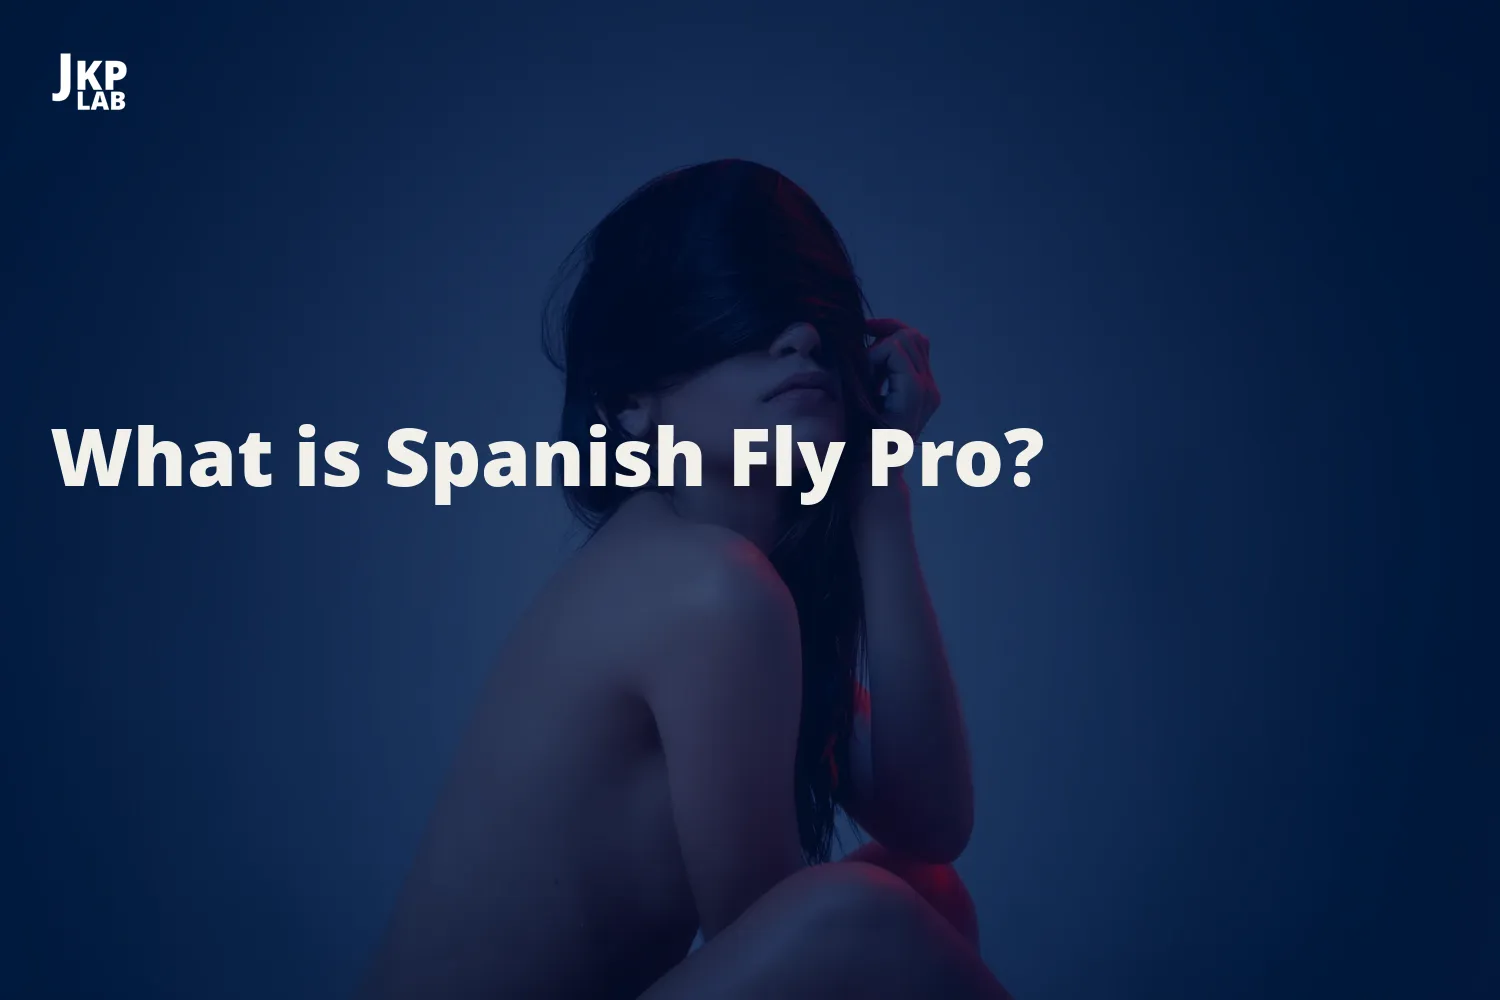 Future Trends: The Evolving World of Spanish Fly